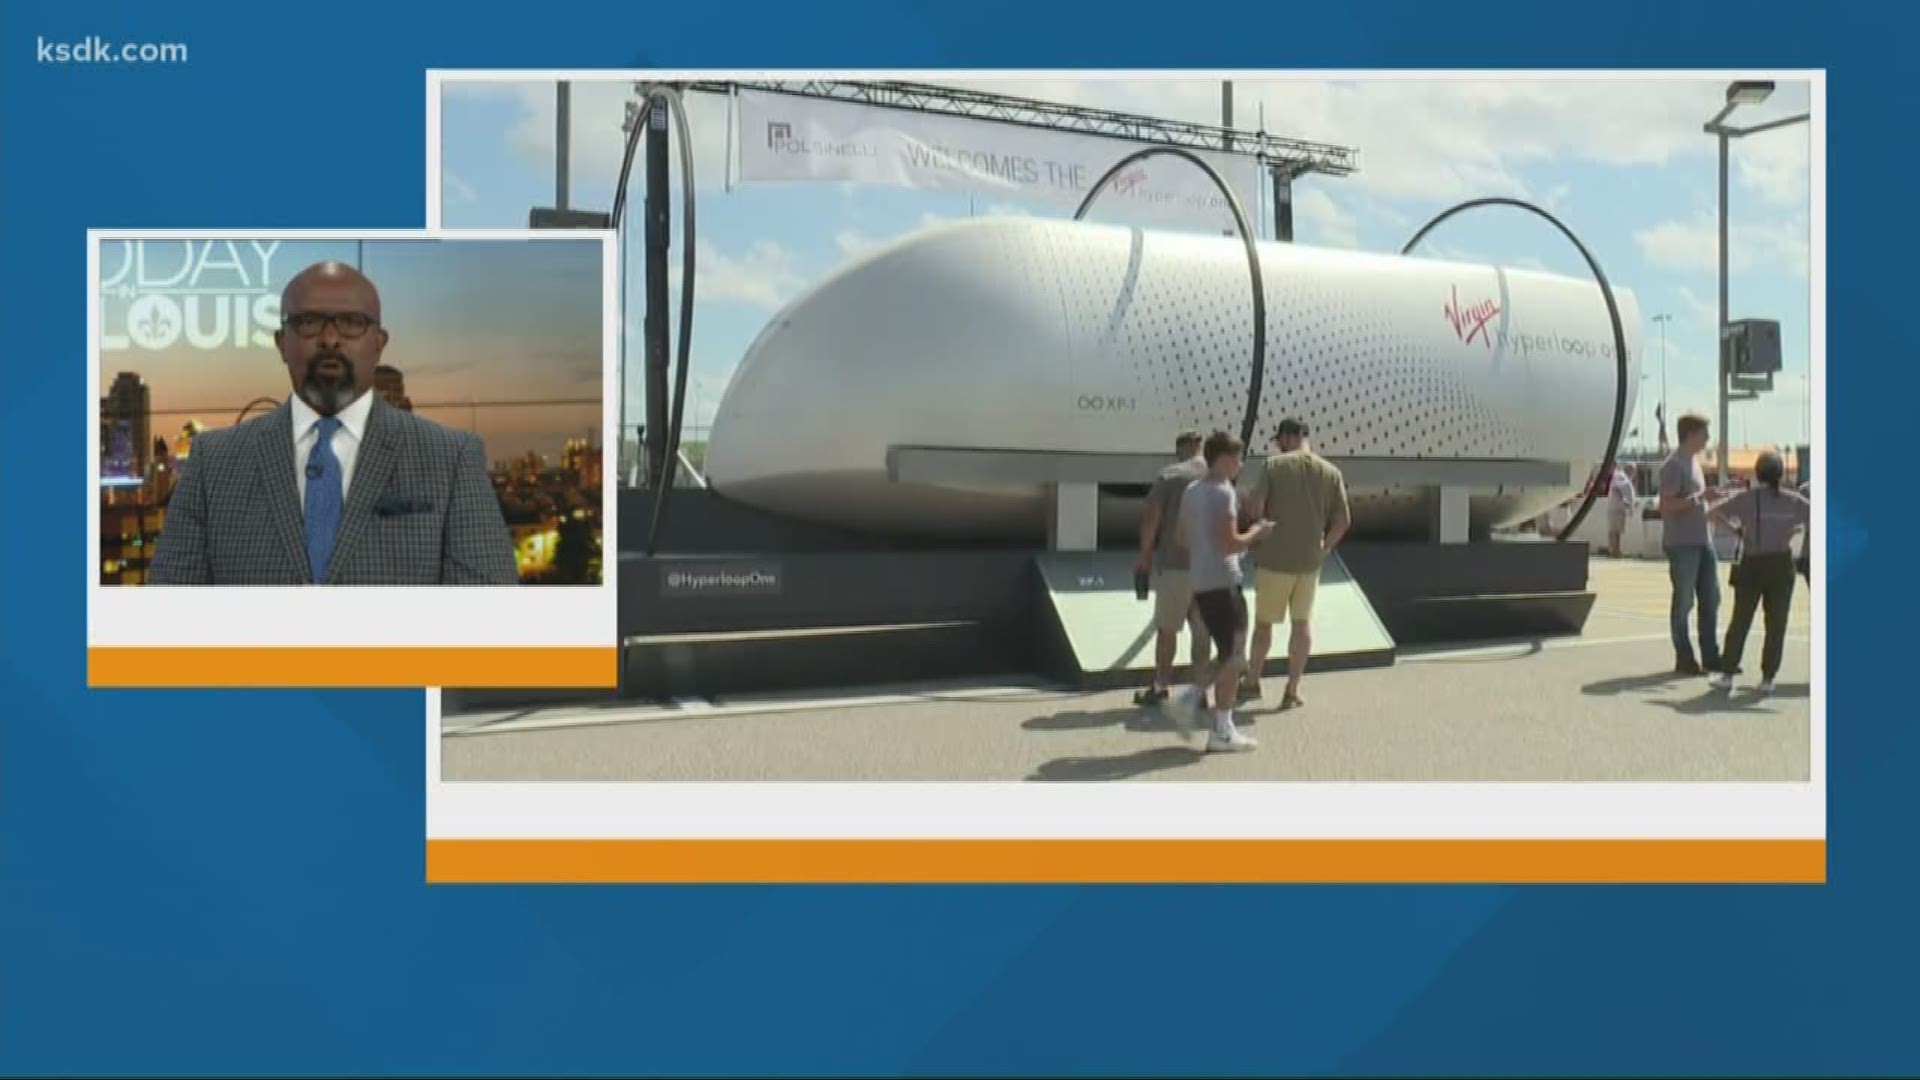 We are one step closer to making the hyperloop from St. Louis to Kansas city a possibility. A test pod was showed off last weekend in Kansas City.